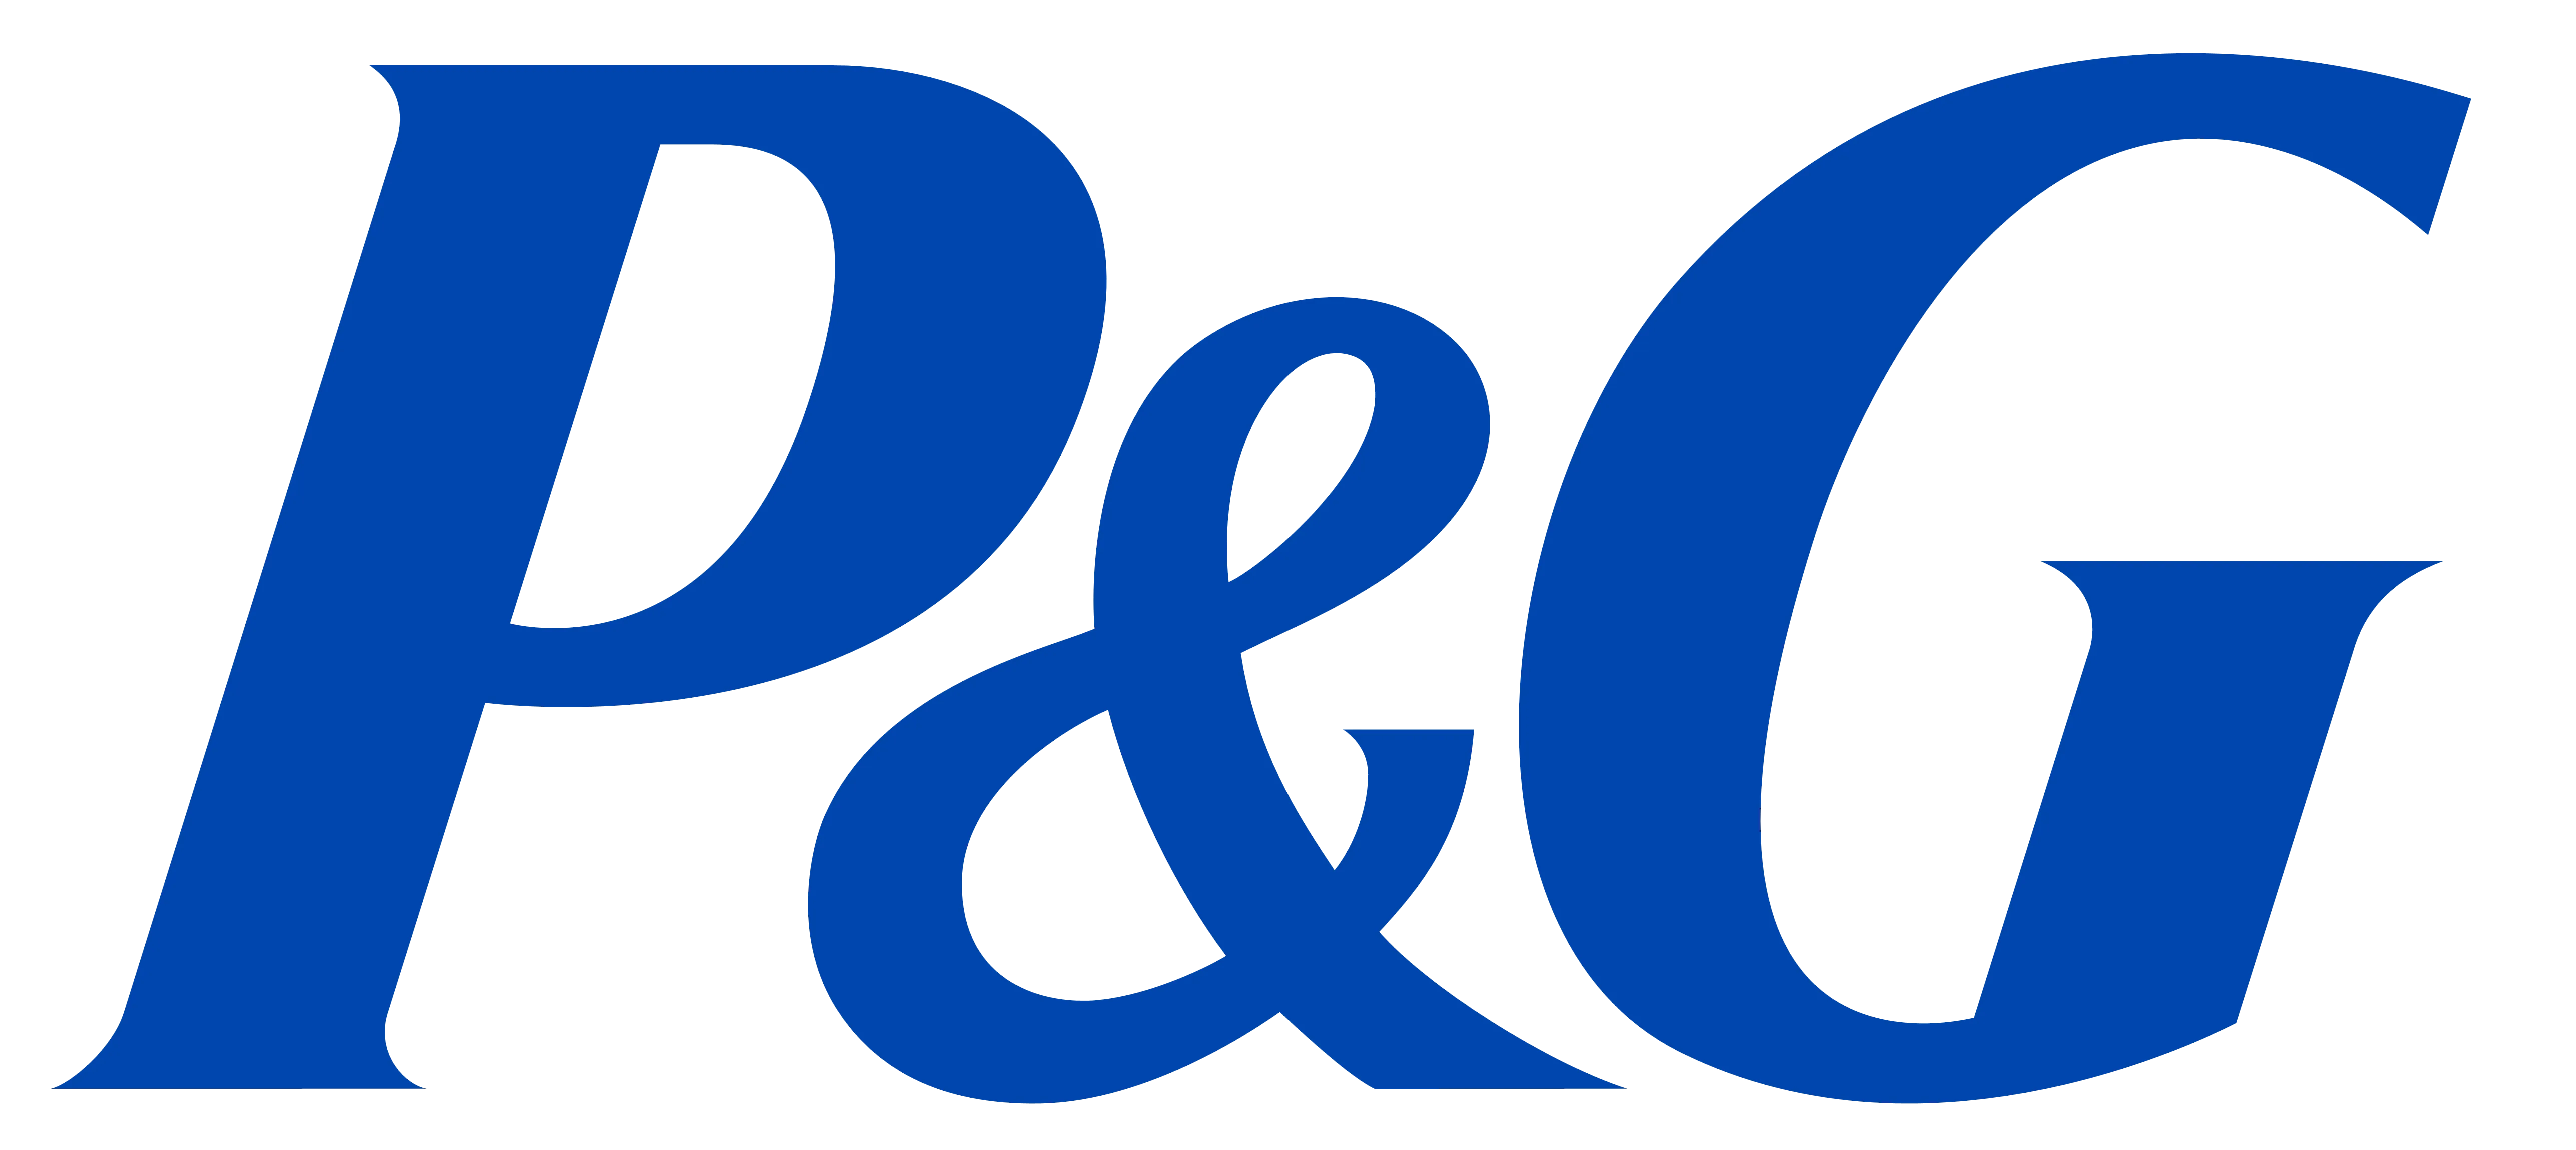 /uploads/P_and_G_Procter_and_Gamble_logo_9ceb07a0be.webp